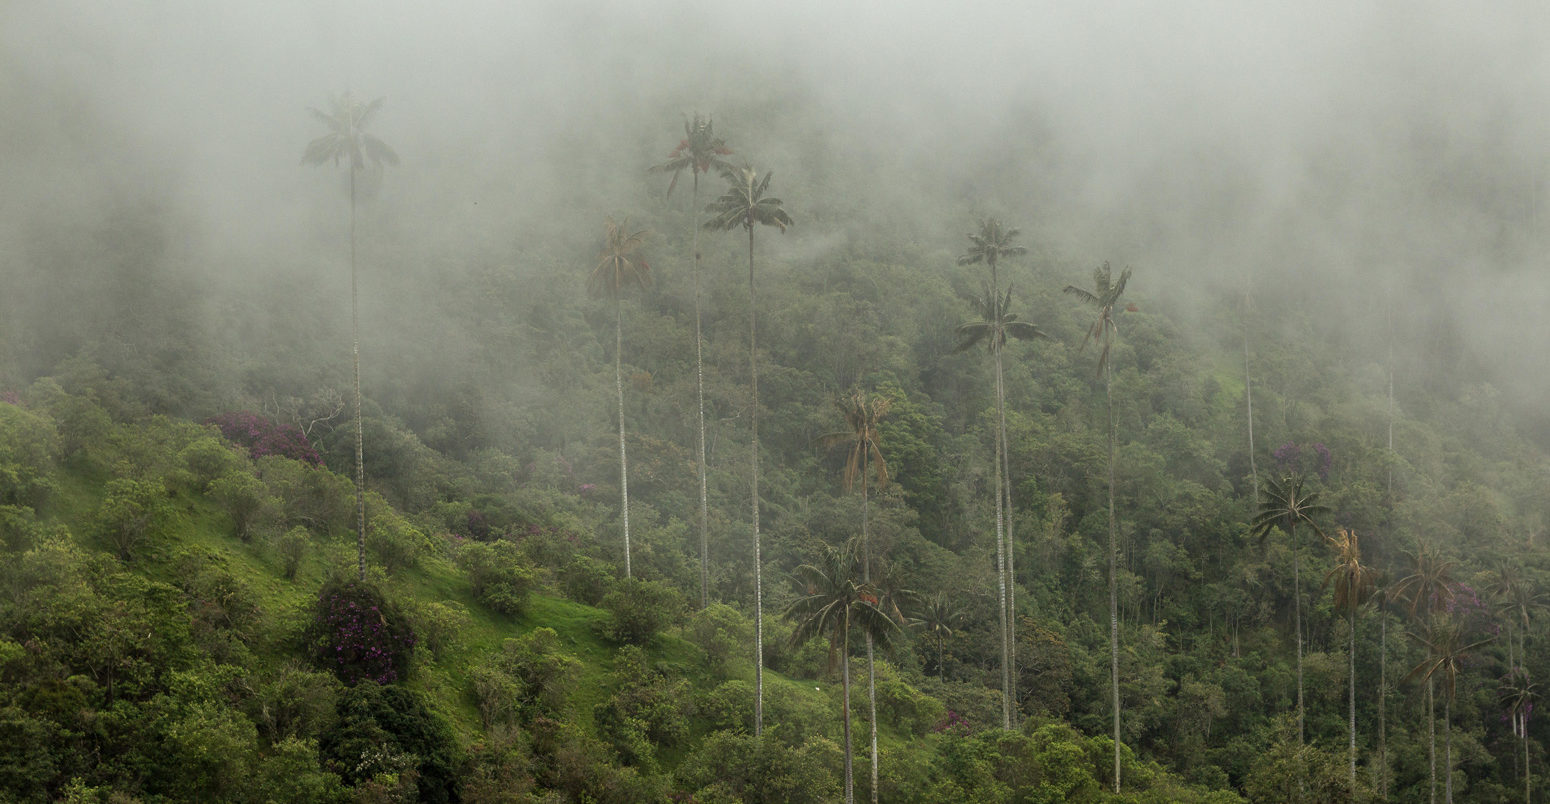 Foggy-rainforest-of-wax-palm-trees-of-the-Andes-in-Cocora-Valley-Colombia